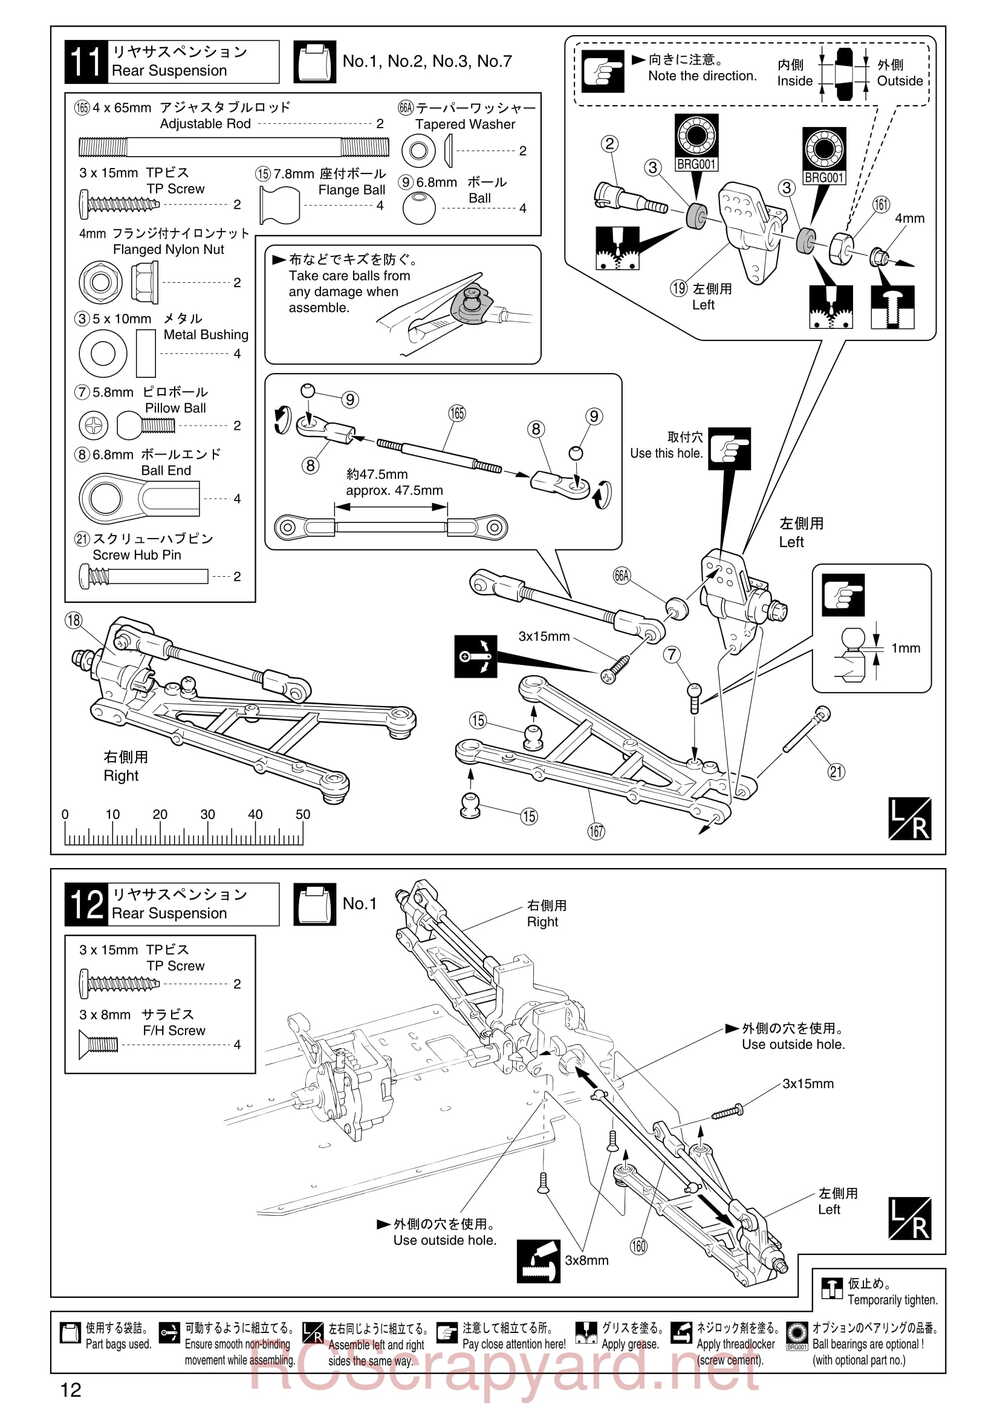 Kyosho - 31213 - TR-15 Monster-Touring - Manual - Page 12